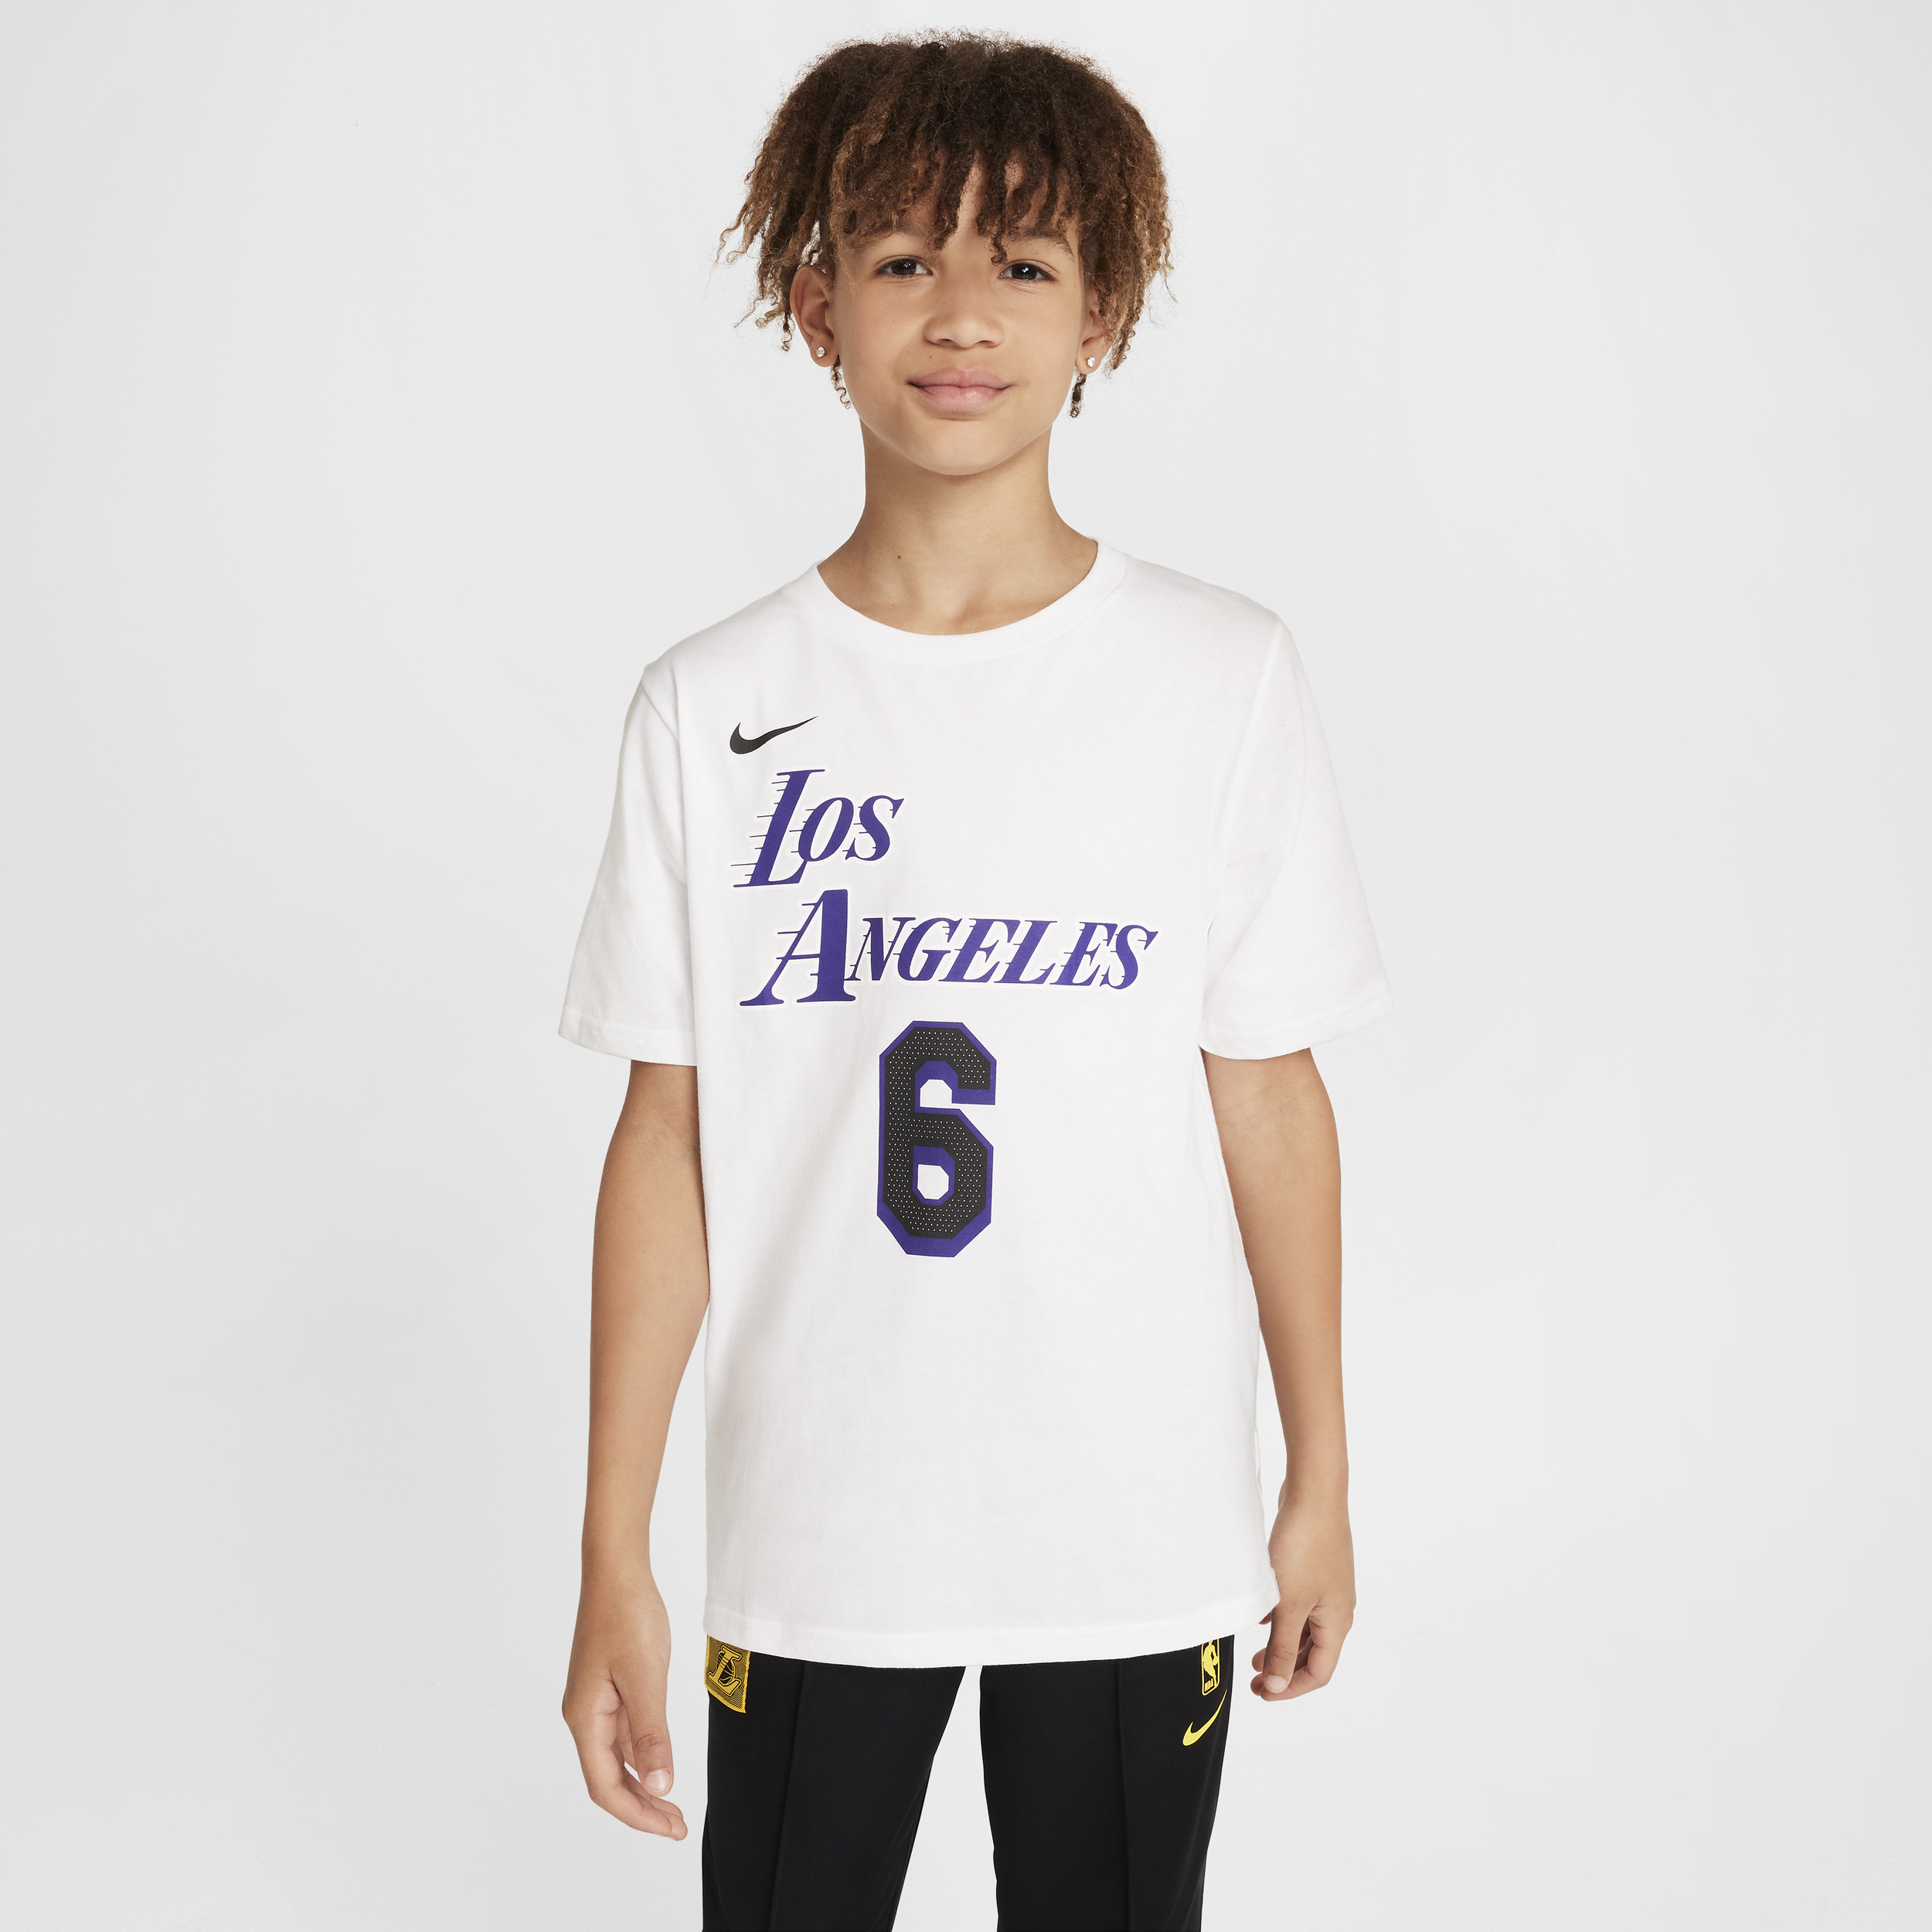 Los Angeles Lakers City Edition Nike NBA-shirt voor kids - Wit